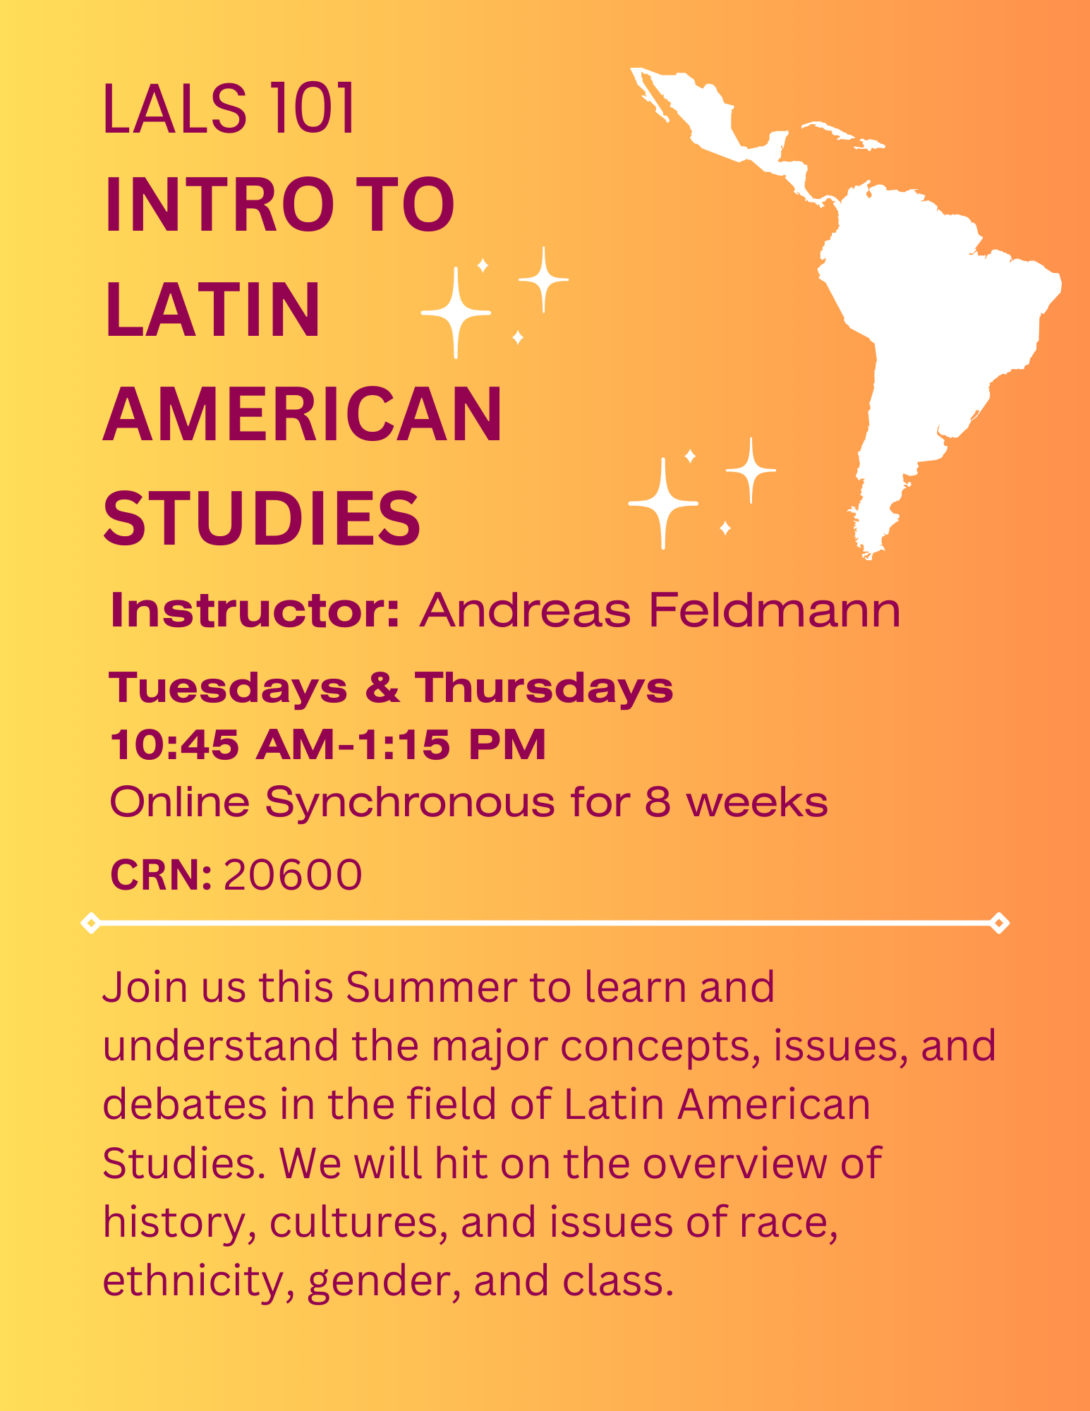 LALS 101 - Introduction to Latin American Studies